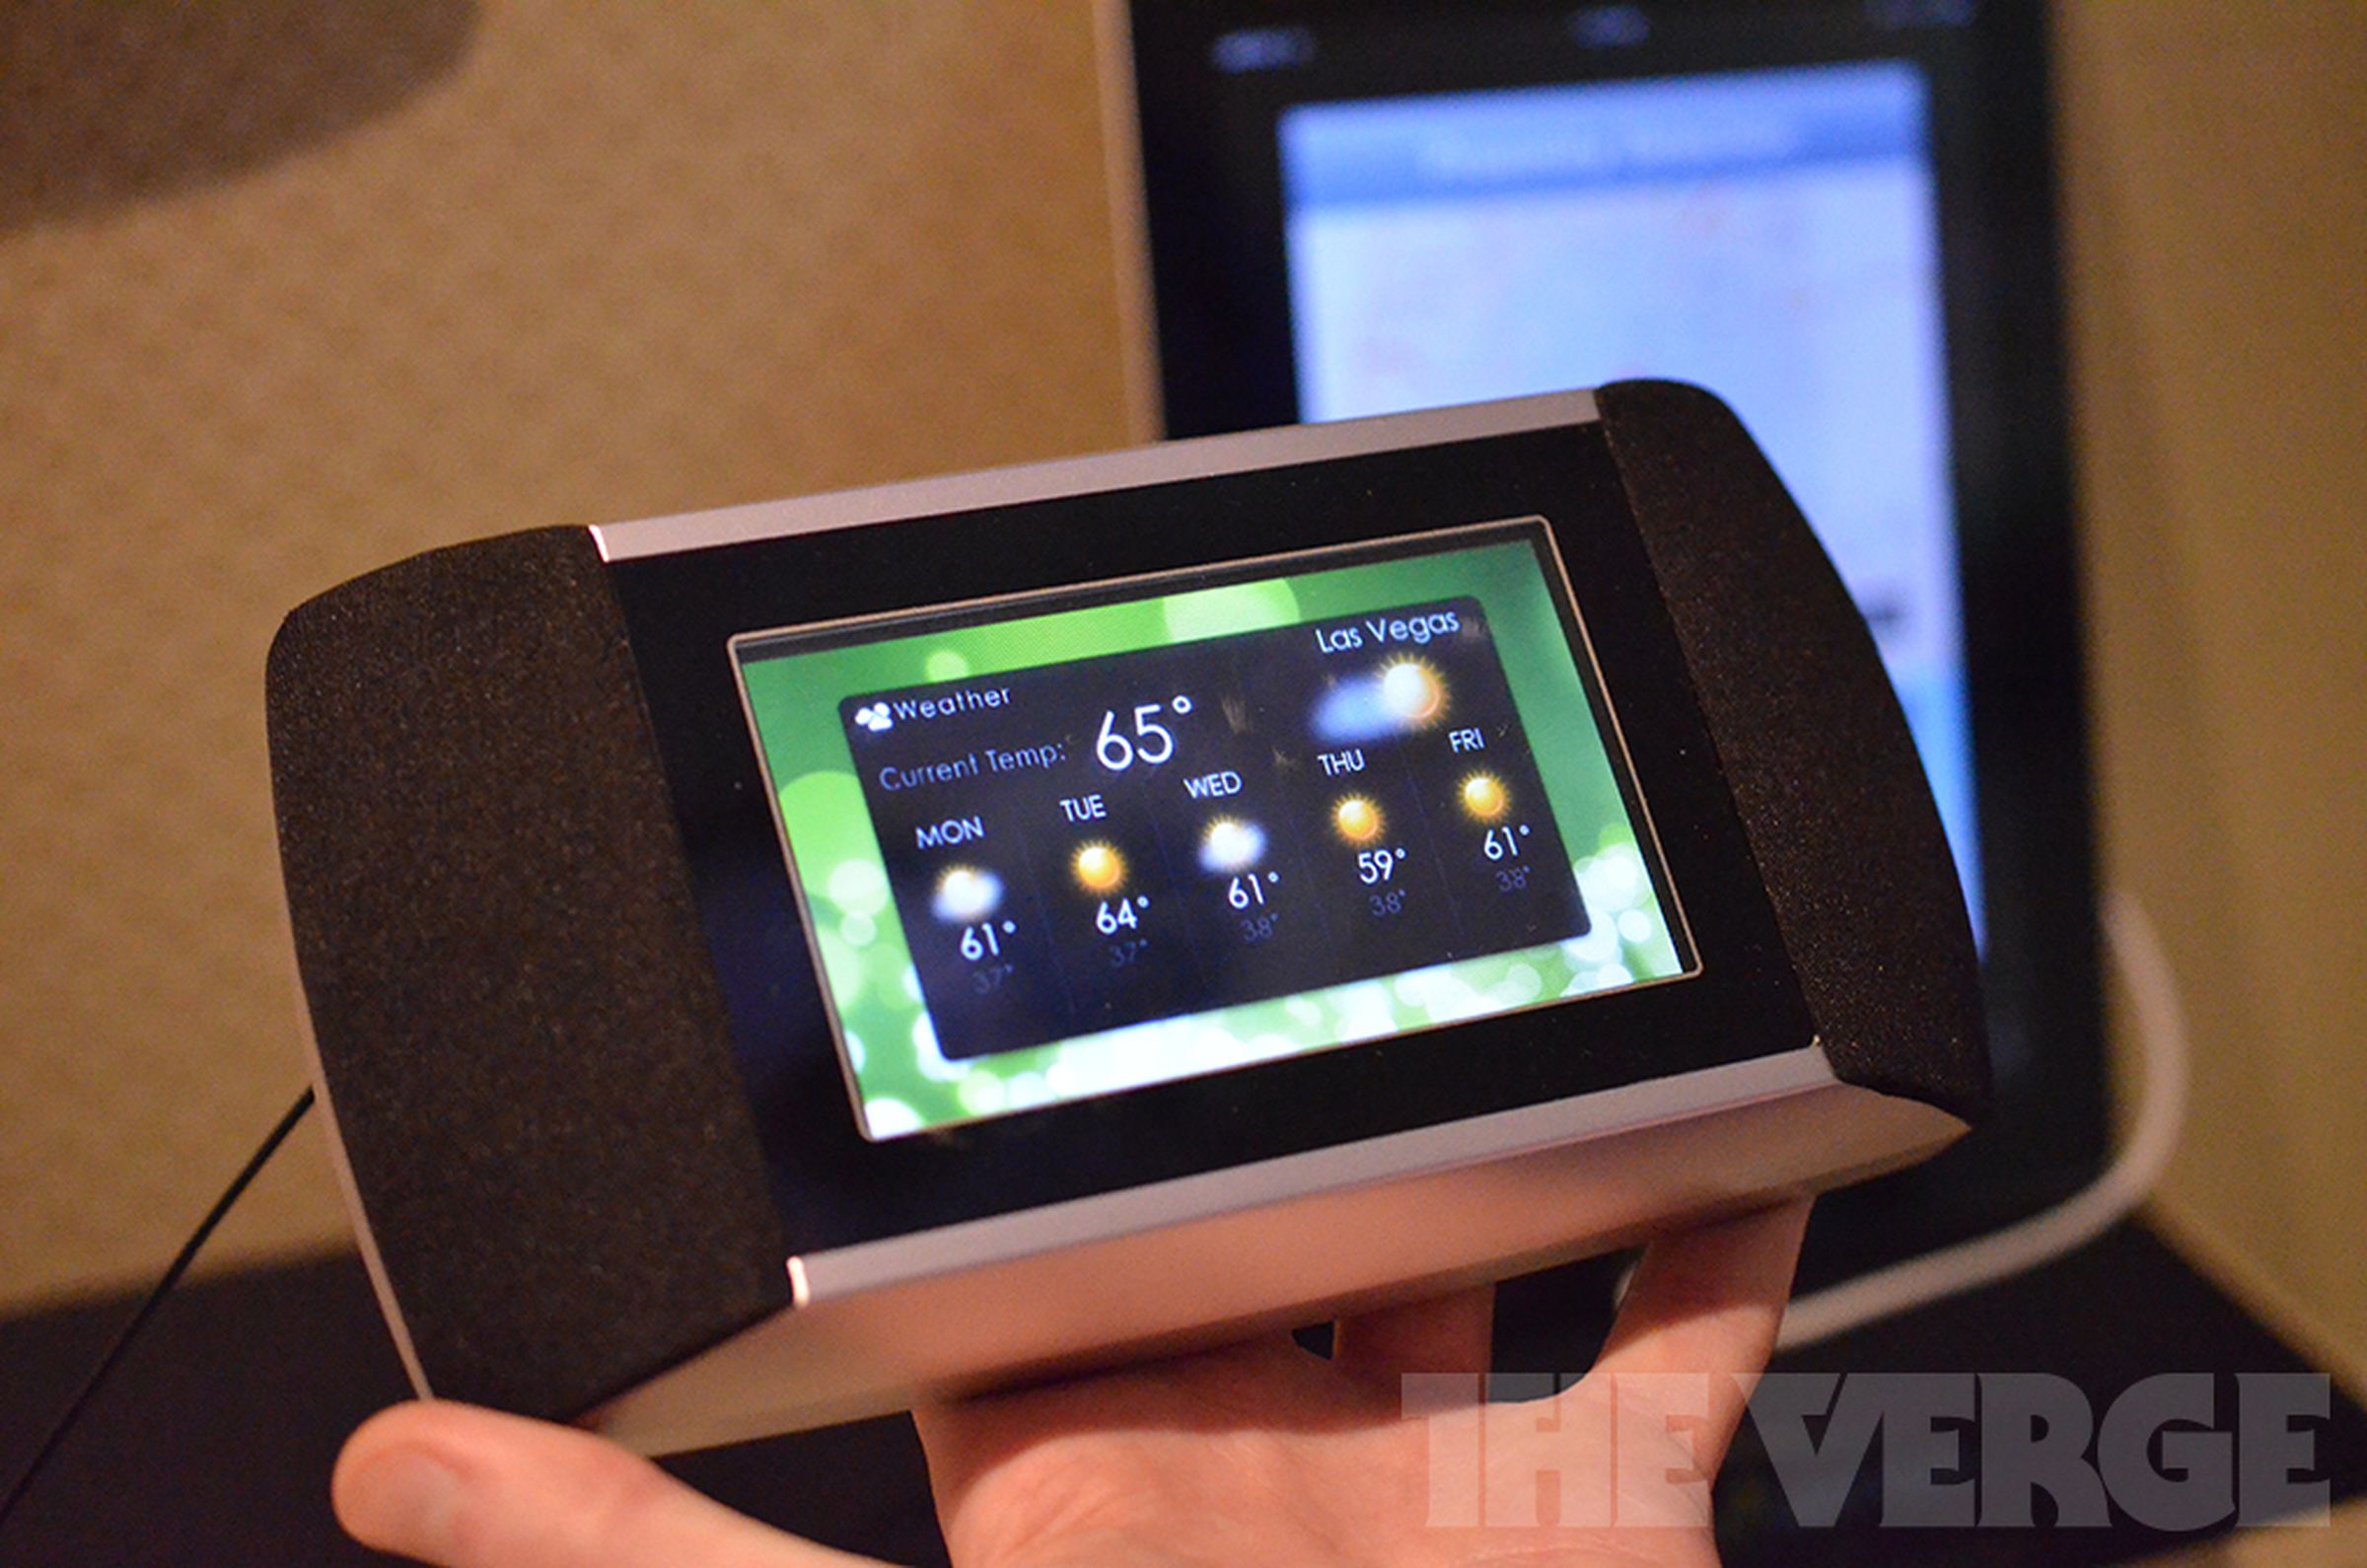 Allure's EverSense touchscreen thermostat (hands-on images)